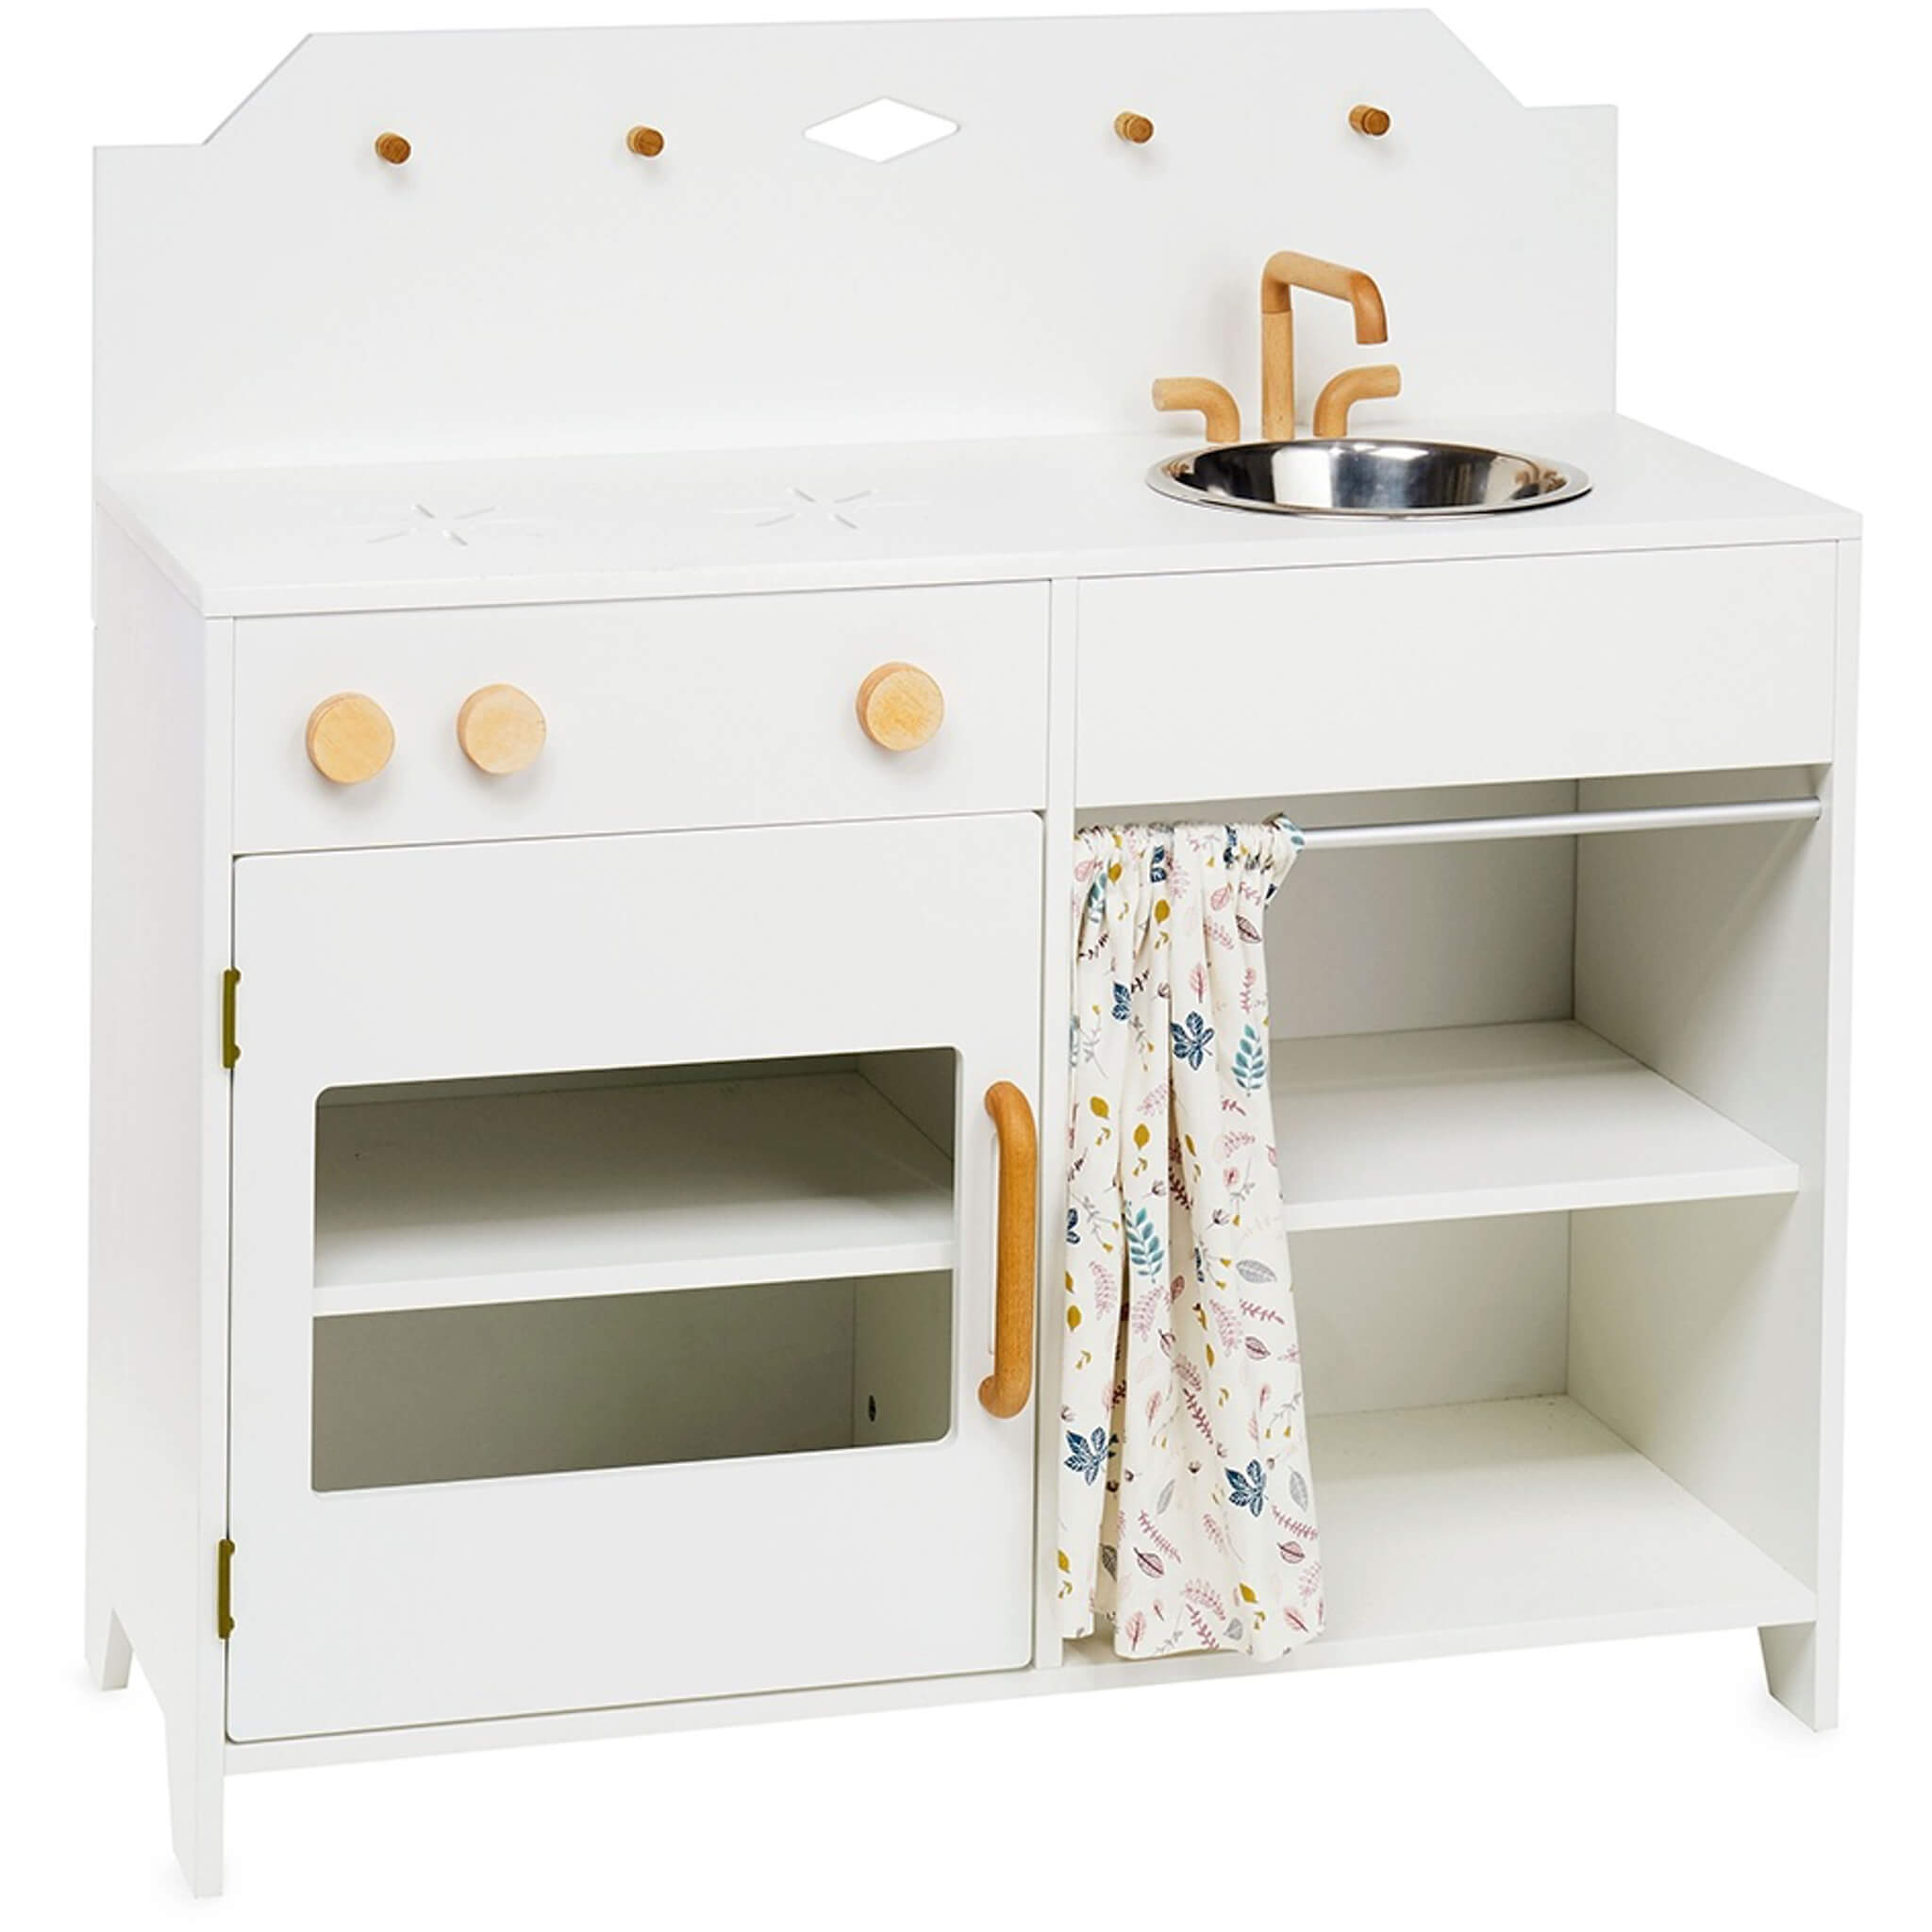 Play Kitchen - White / Pressed Leaves